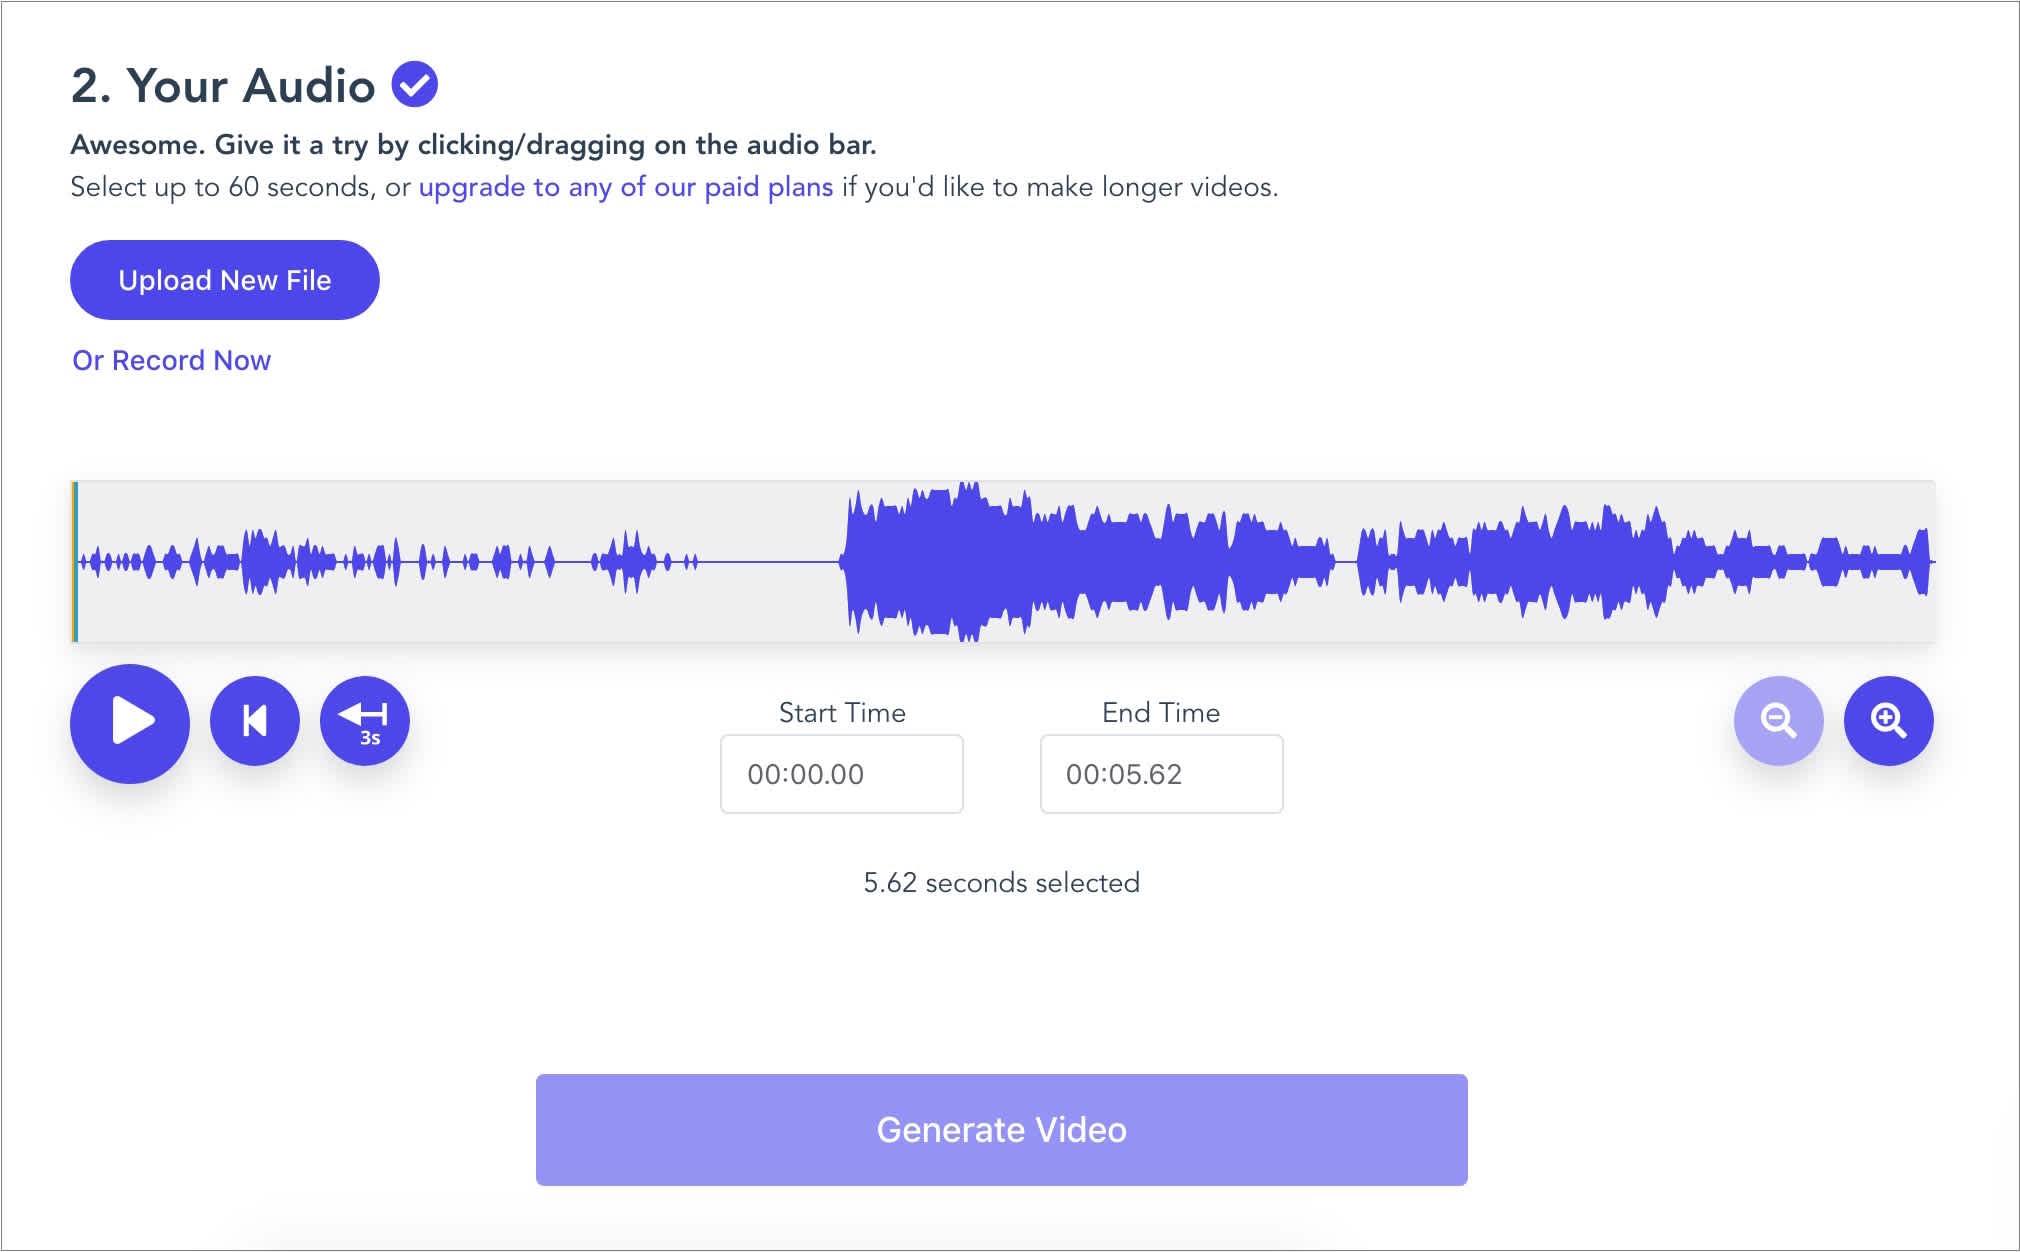 Wavve actually integrates with Subtitle to let add captions to audio.